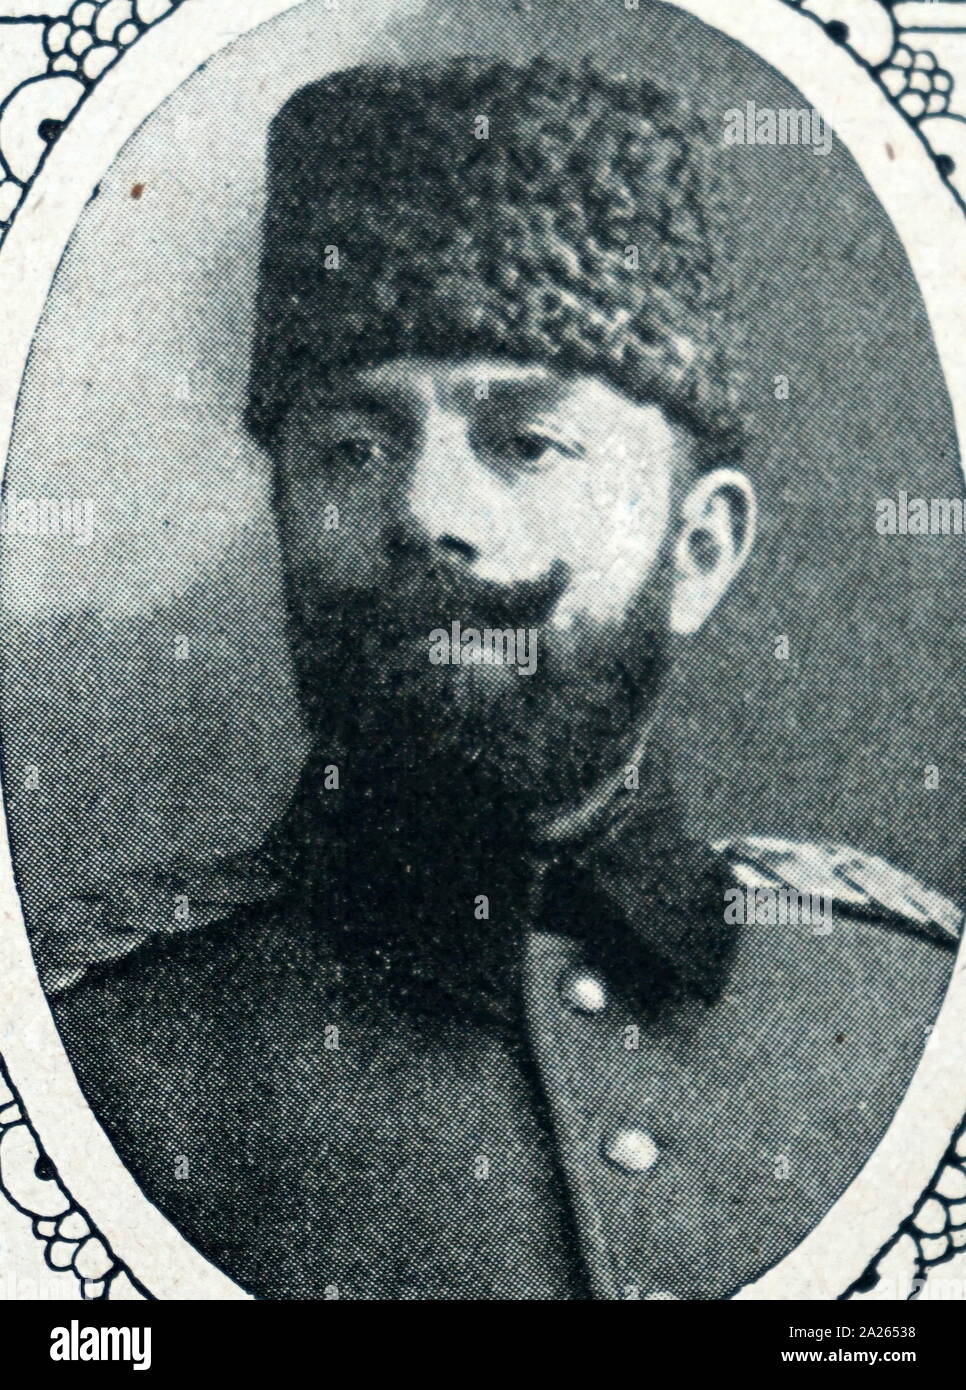 Ahmed Djemal Pasha (1872 – 1922), commonly known as Jamal Pasha the Bloodthirsty; Ottoman military leader and one-third of the military triumvirate known as the Three Pashas (also called the 'Three Dictators') that ruled the Ottoman Empire during World War I. Stock Photo